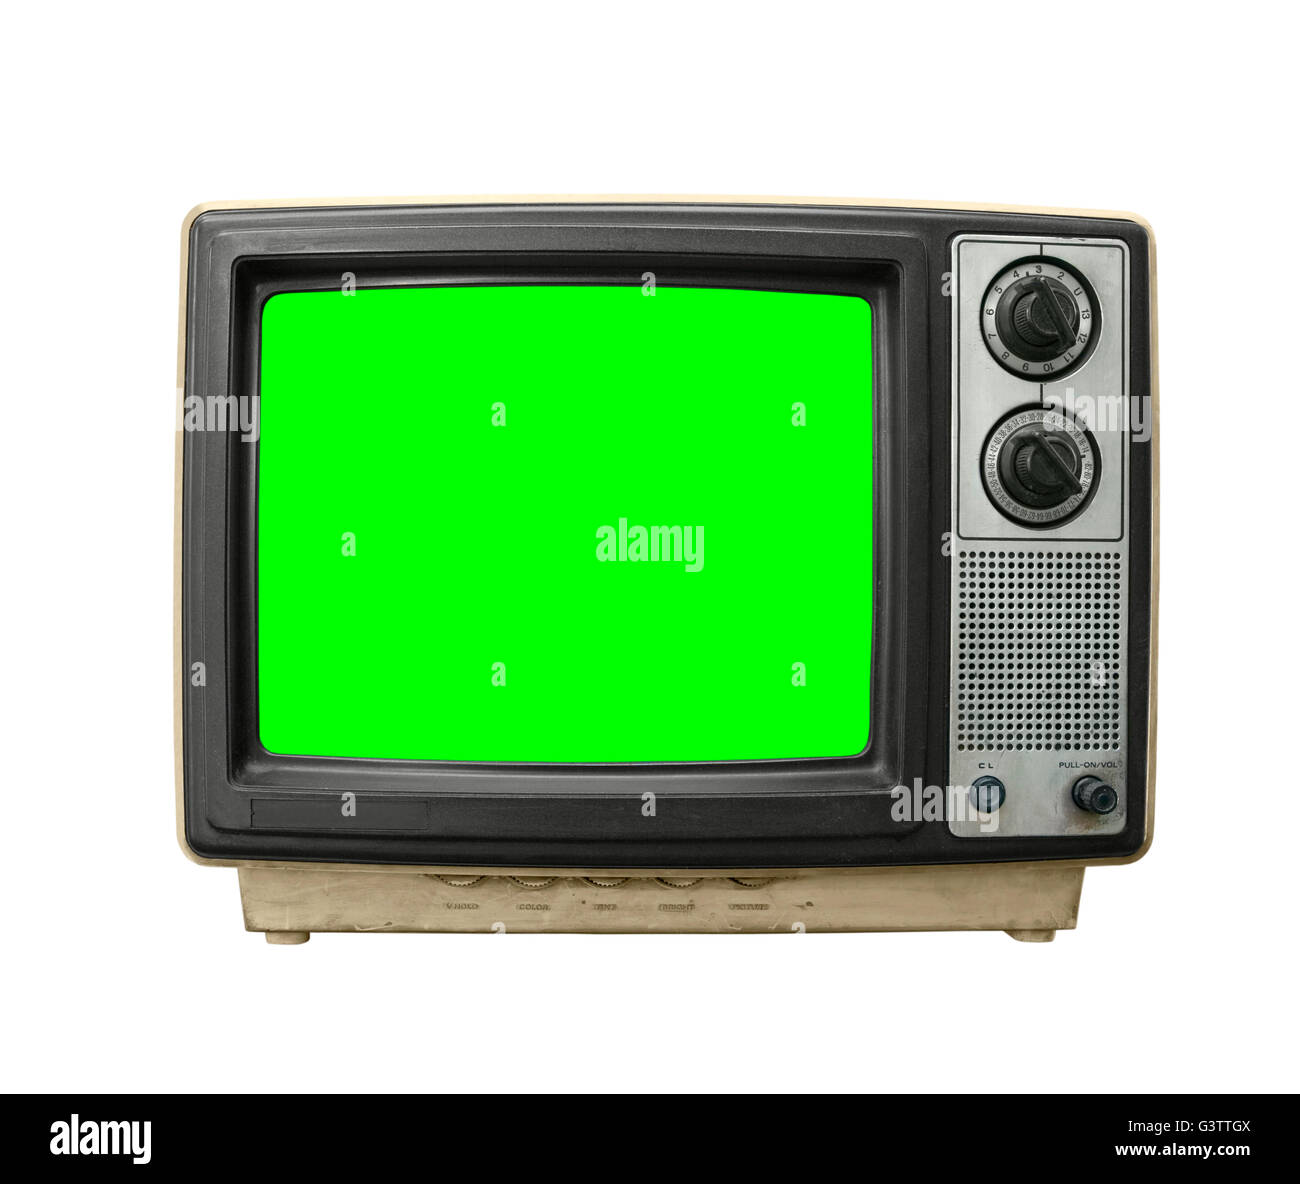 Grungy dirty old television on white with chroma key green screen. Stock Photo